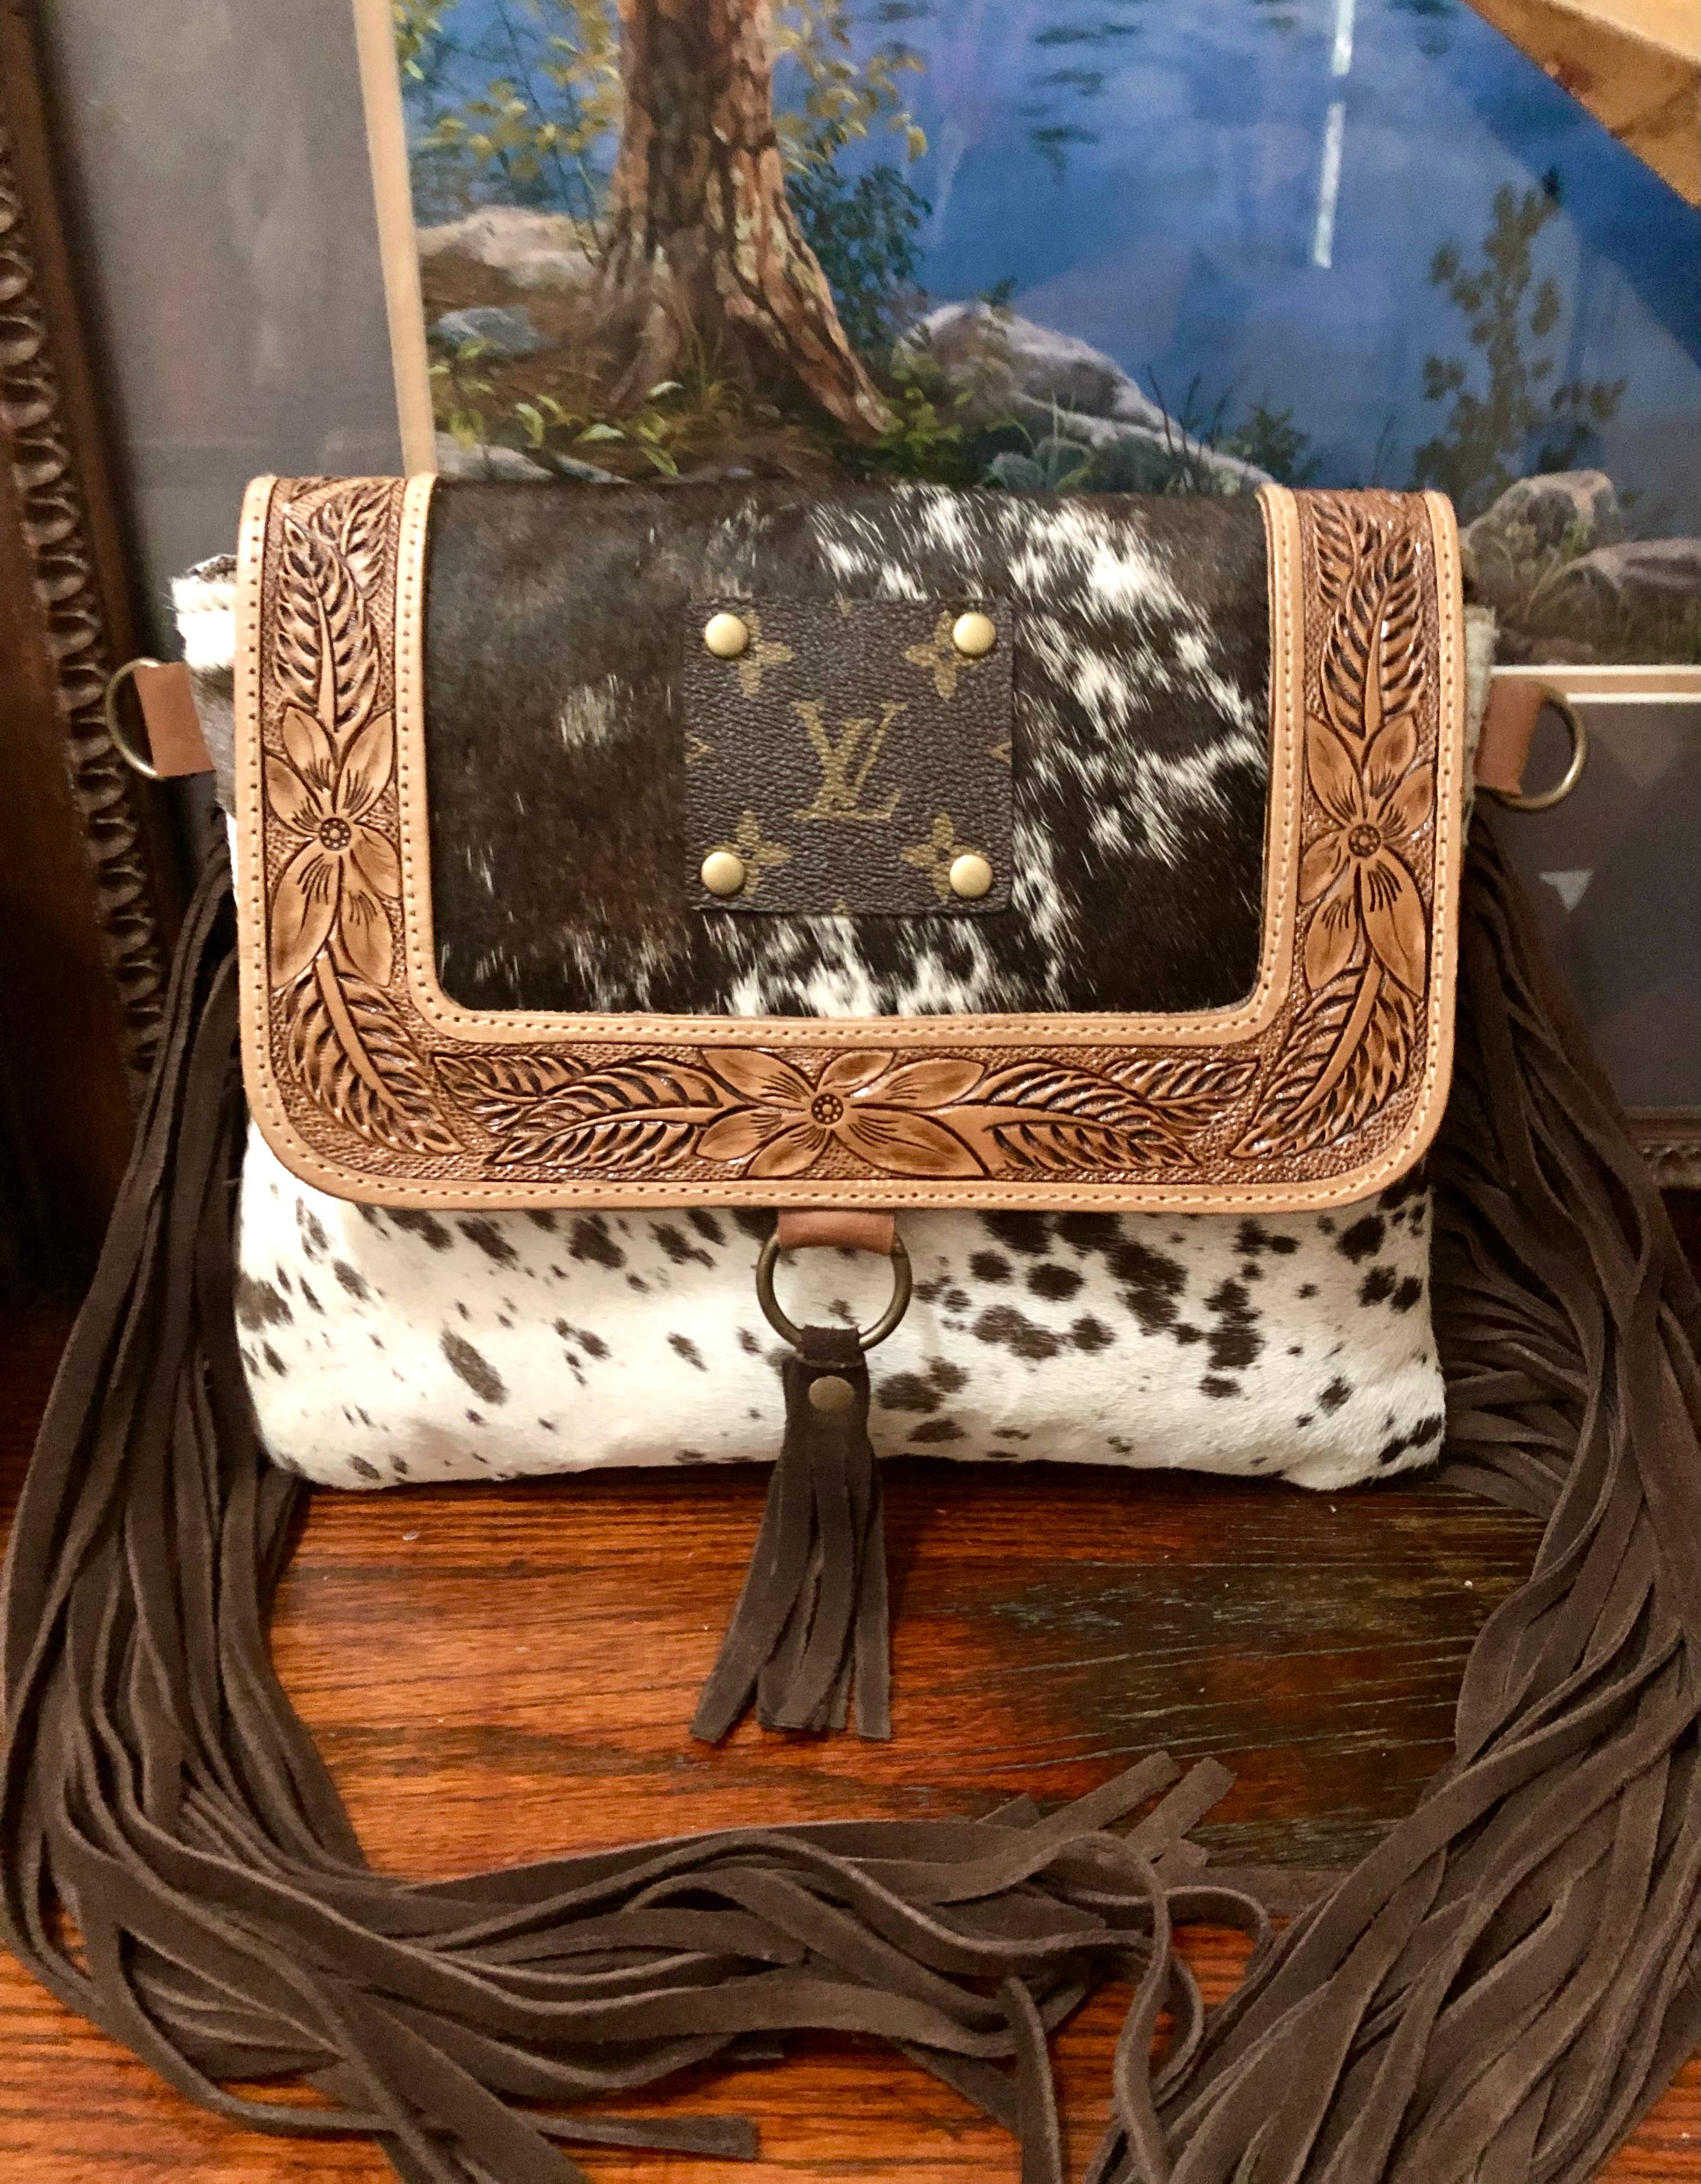 Revamped Louis Vuitton Dark Brown Pocket Wallet  The Spirit of the West  mixed with a little Boho Gypsy!